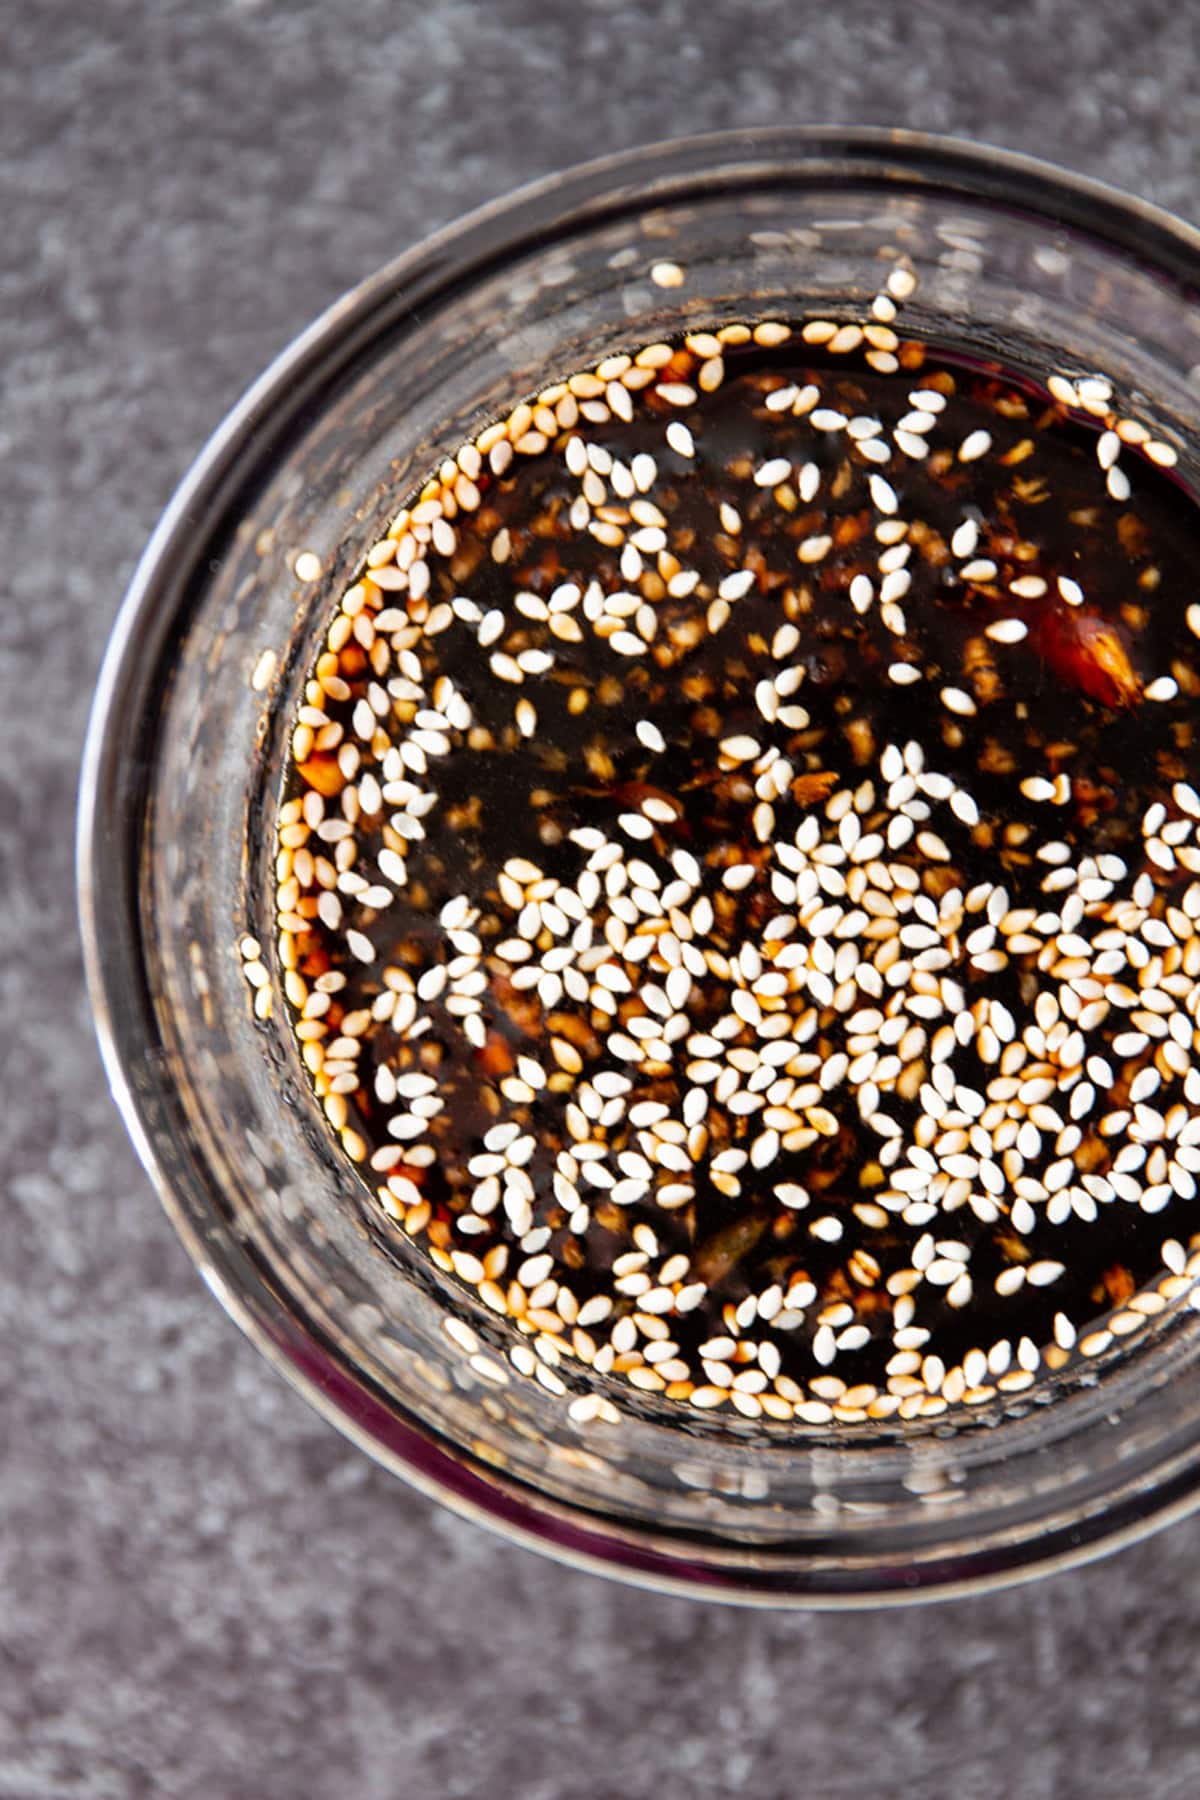 Glass jar containing a teriyaki marinade topped with sesame seeds.